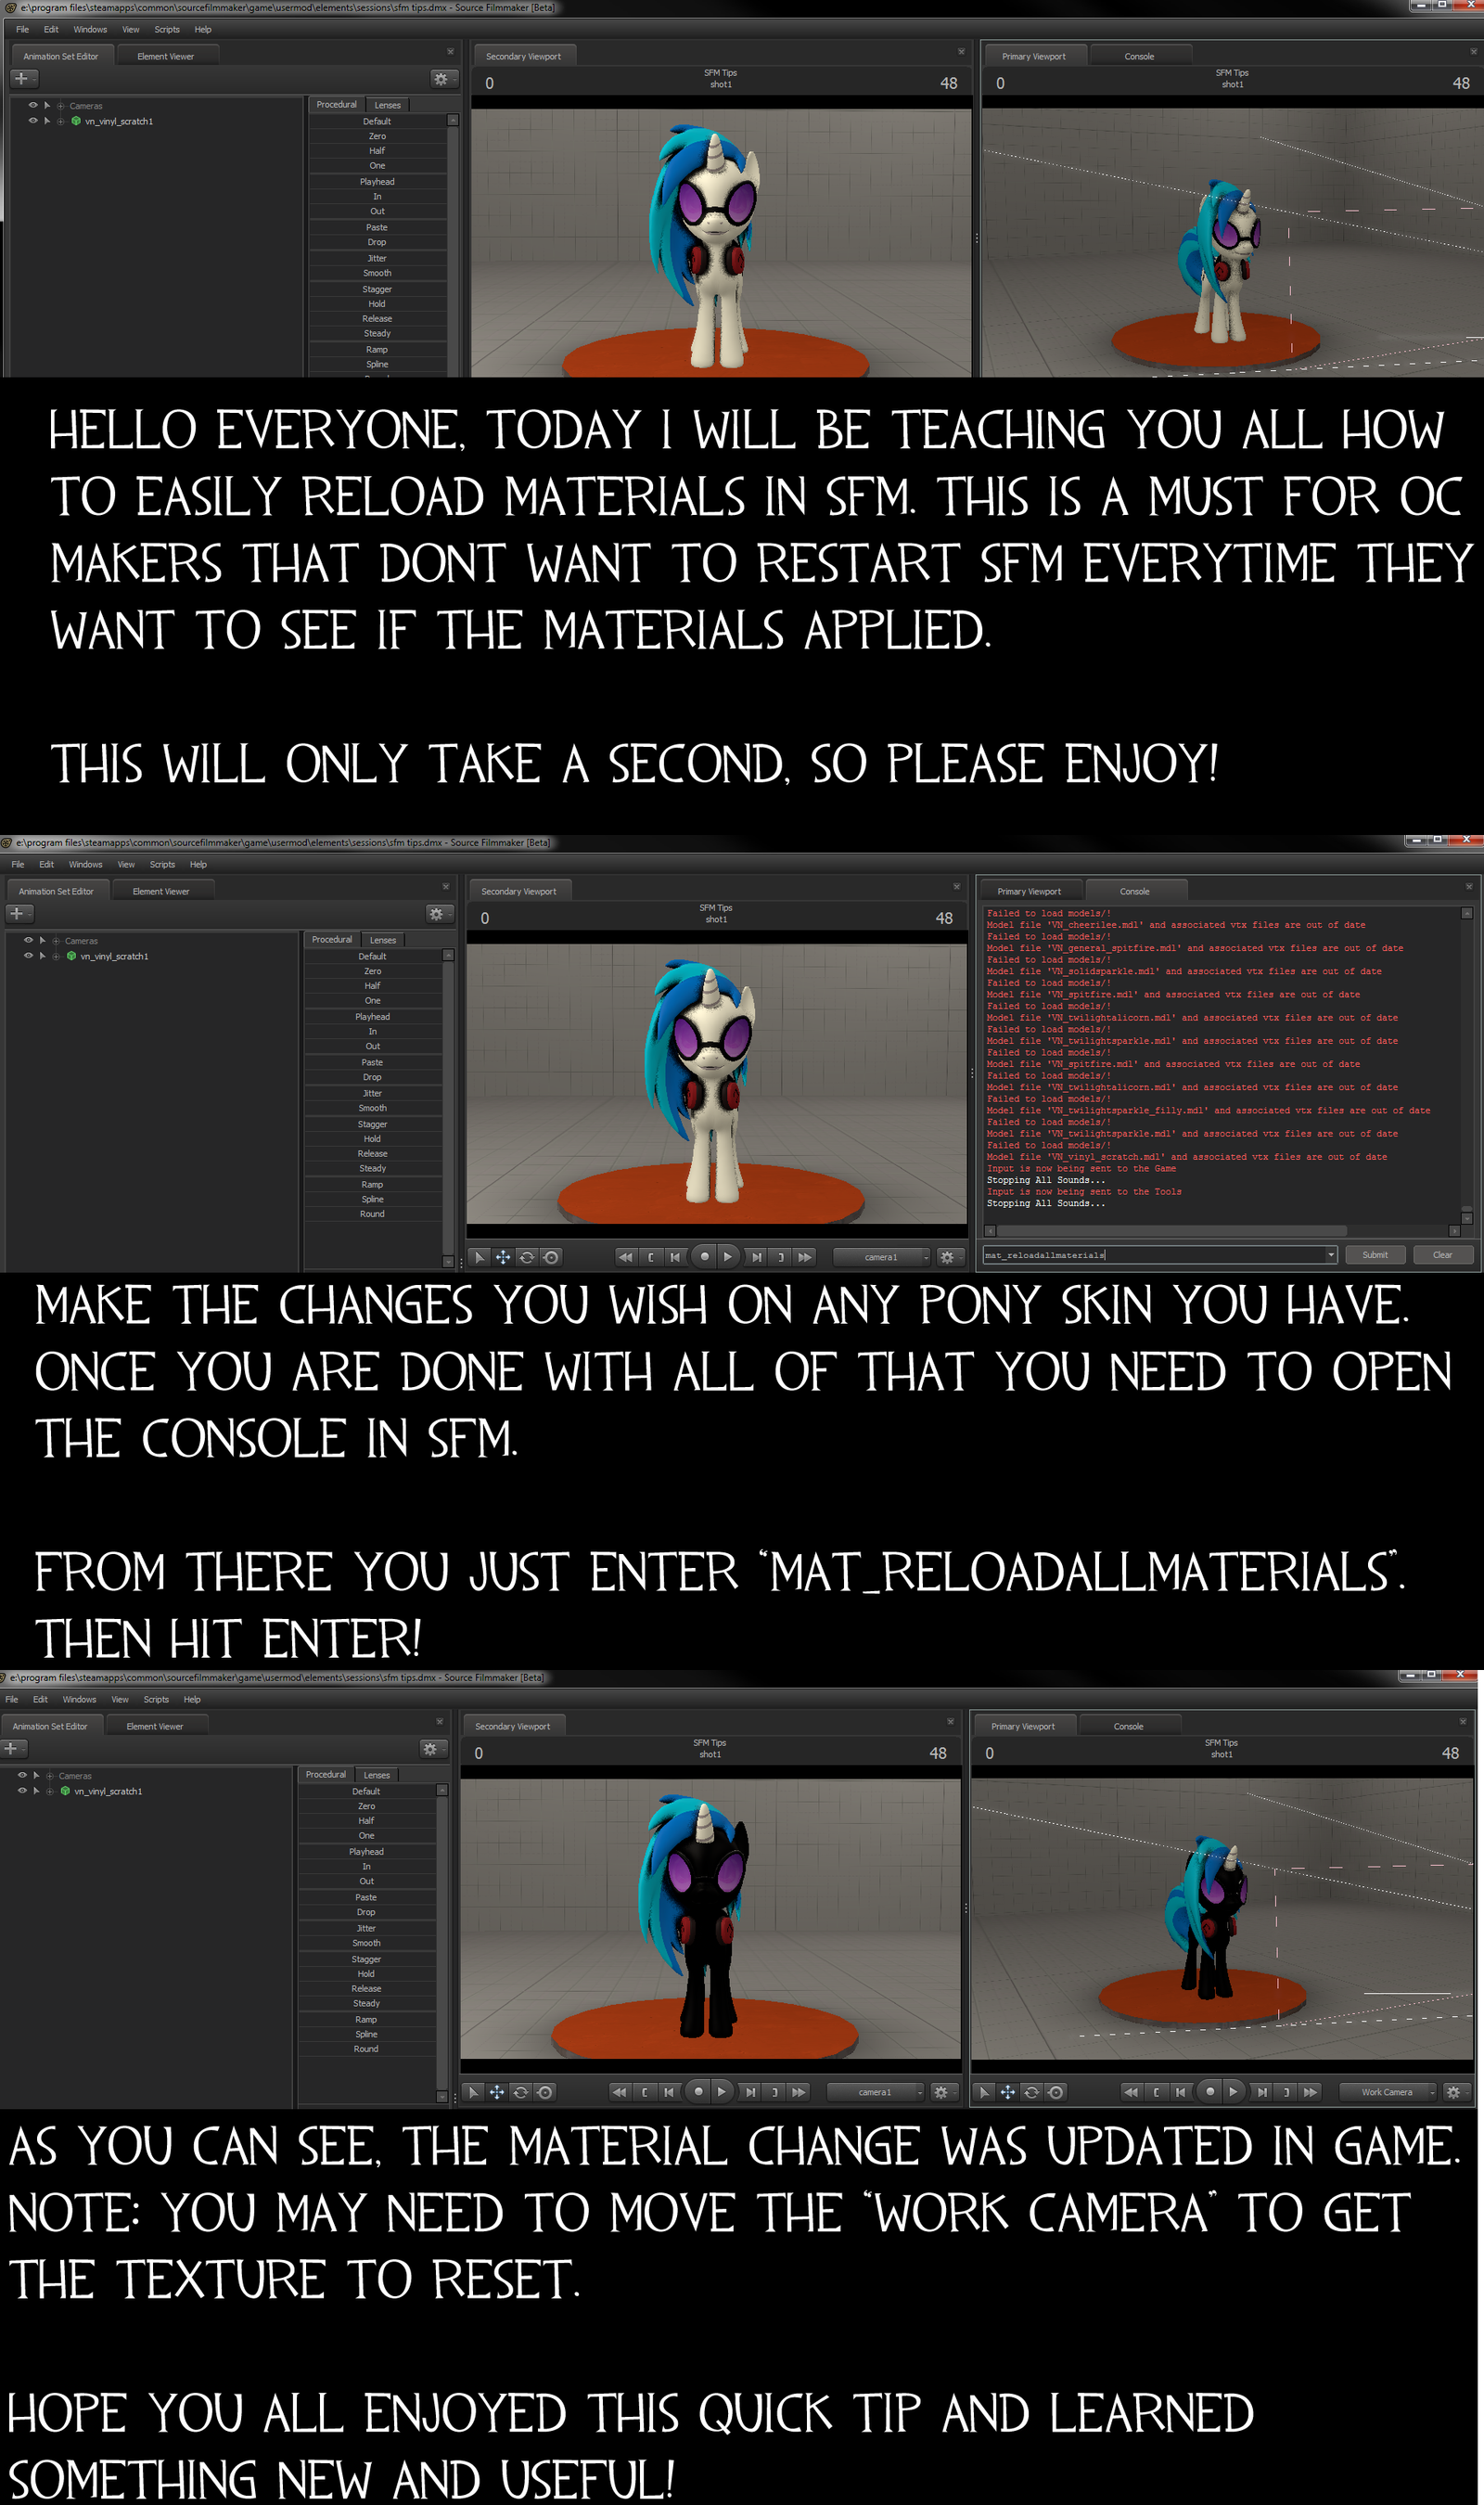 SFM Quick Tip: In game Material reloading by Sarcastic-Brony on DeviantArt